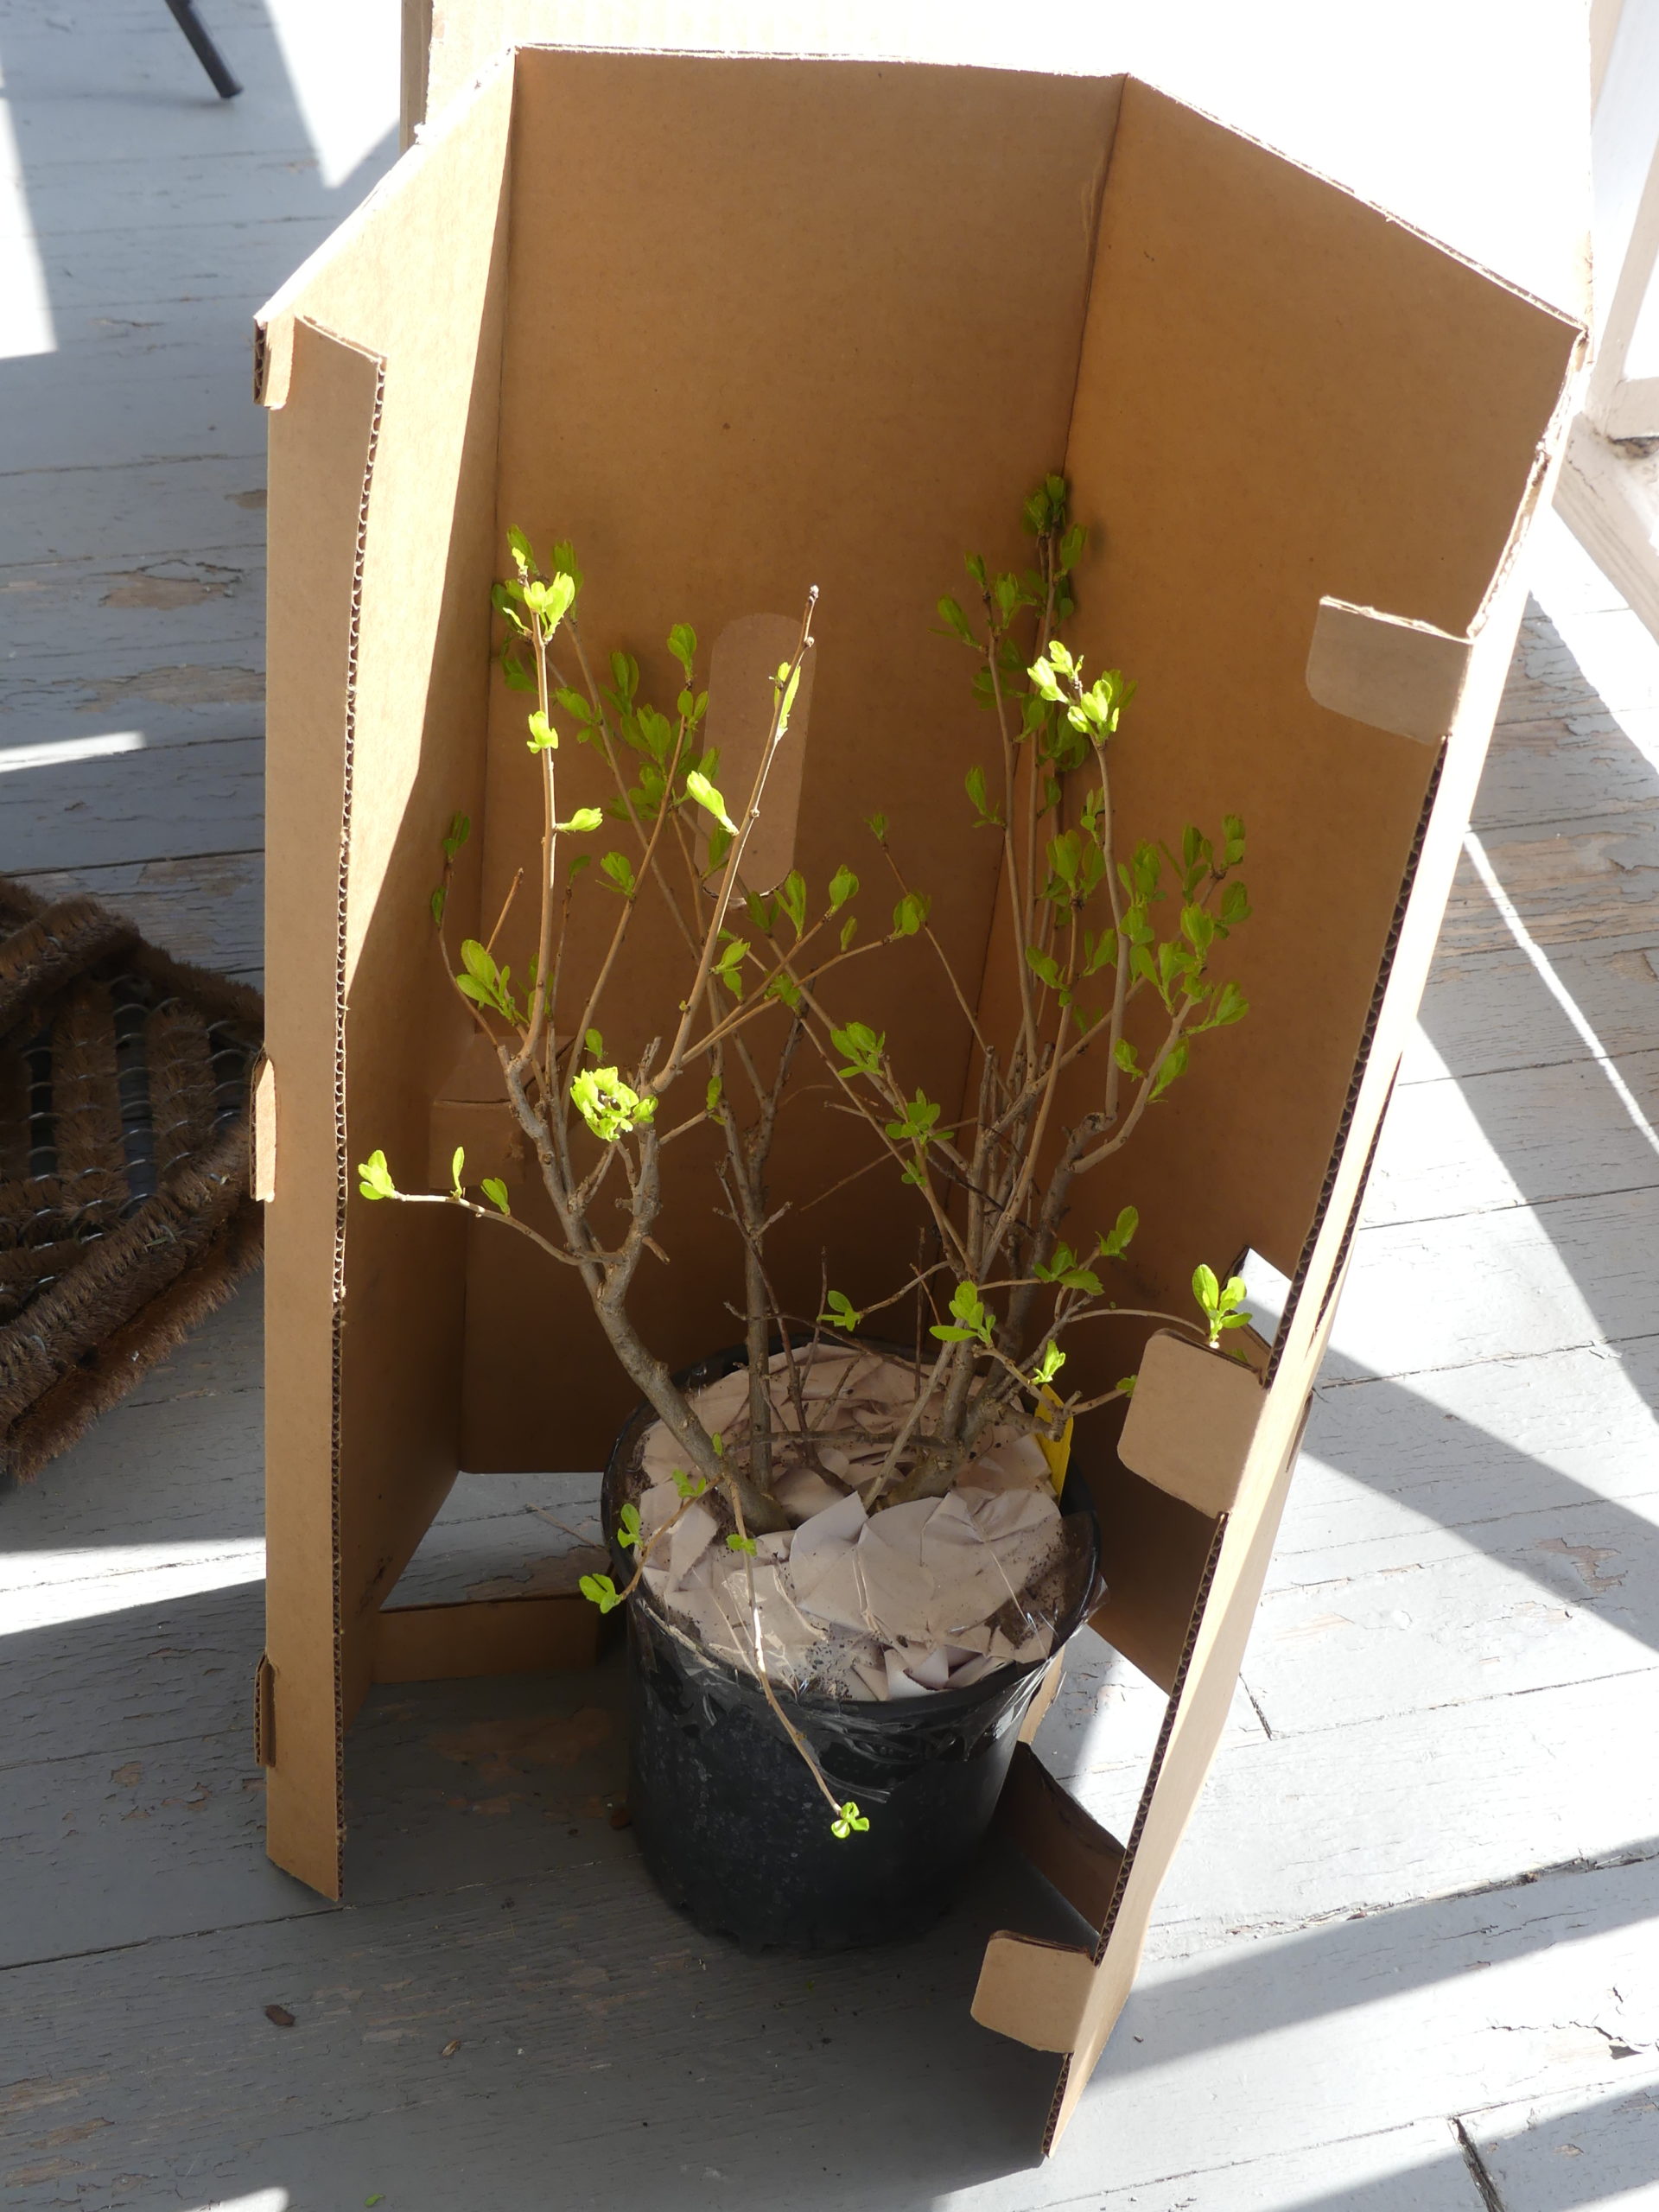 Even fairly large plants like this Ilex verticillata can be shipped by UPS and FedEx. (UPS is always my choice.) This plant is in a 1.5-gallon pot and was about 2 feet tall.  It gets put in a protective cardboard sleeve, seen here, then it goes into an outer shipping box.  Paper put on top of the soil then taped to the pot edge prevents soil loss during shipping.